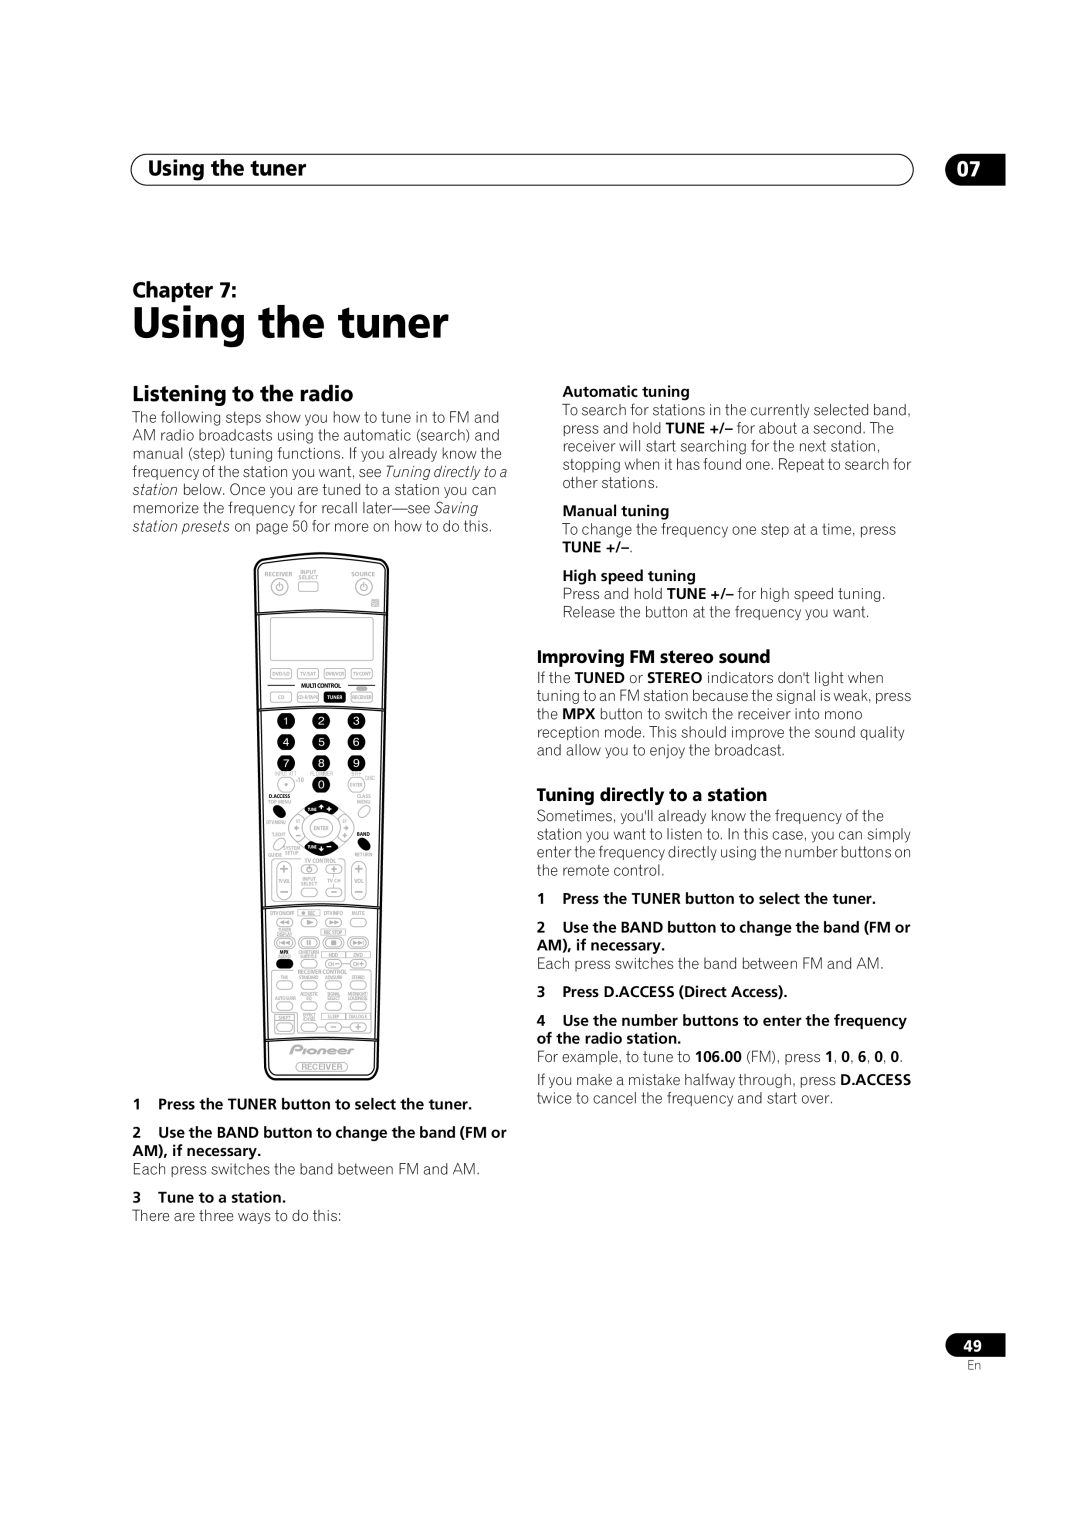 Pioneer VSX-1015TX operating instructions Using the tuner Chapter, Listening to the radio, Improving FM stereo sound 